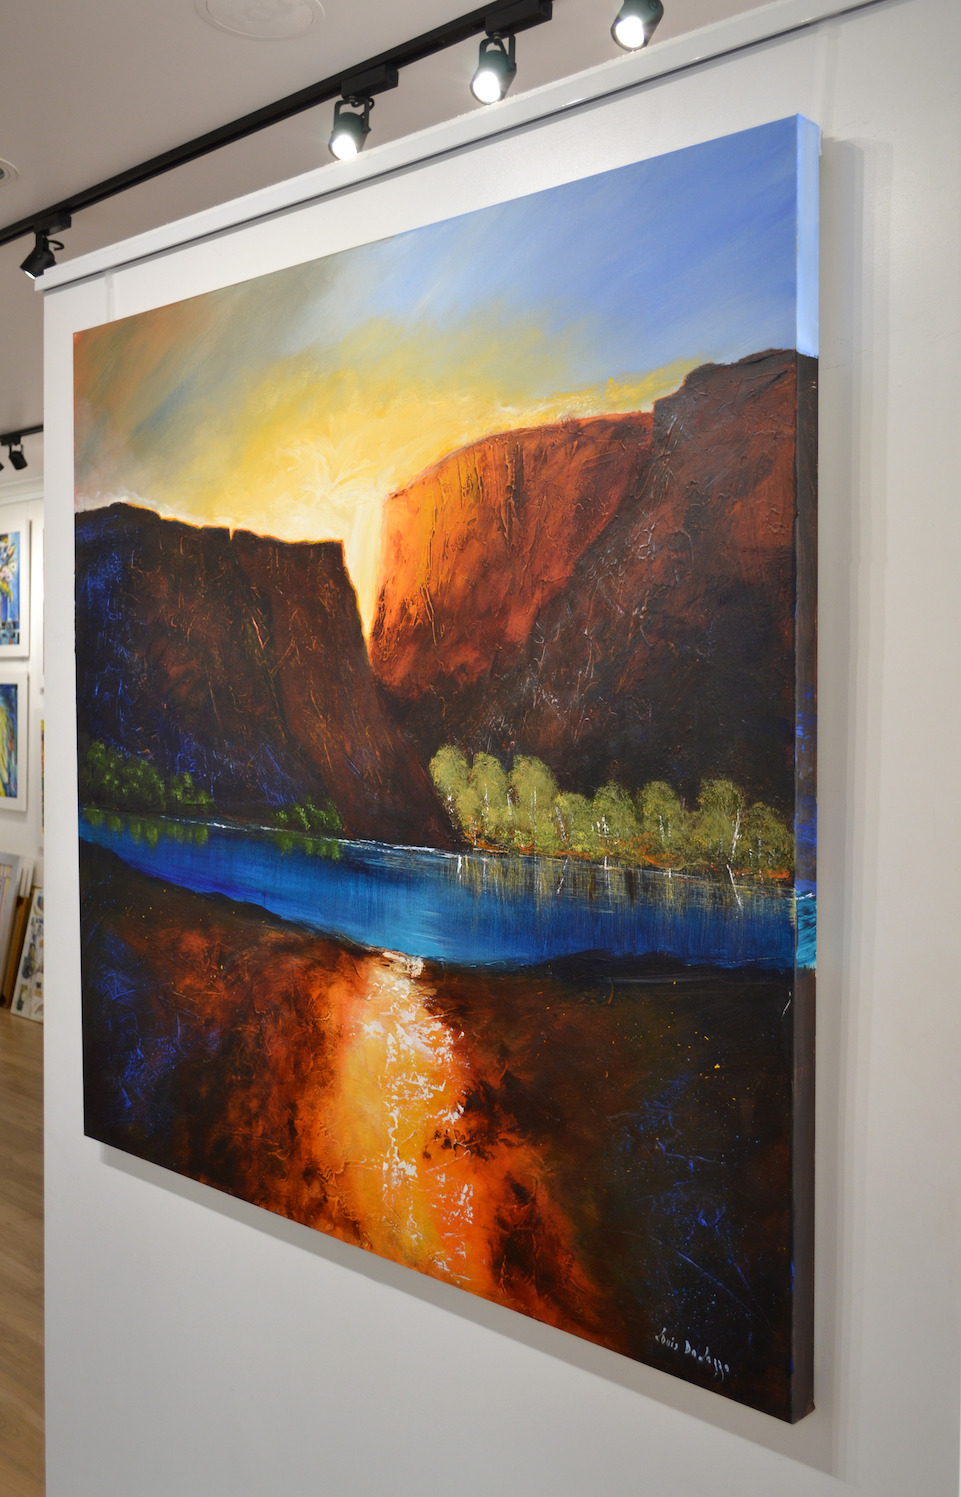 Side View Of Landscape Painting "Umbrawarra Gorge Pine Creek NT" By Louis Dalozzo